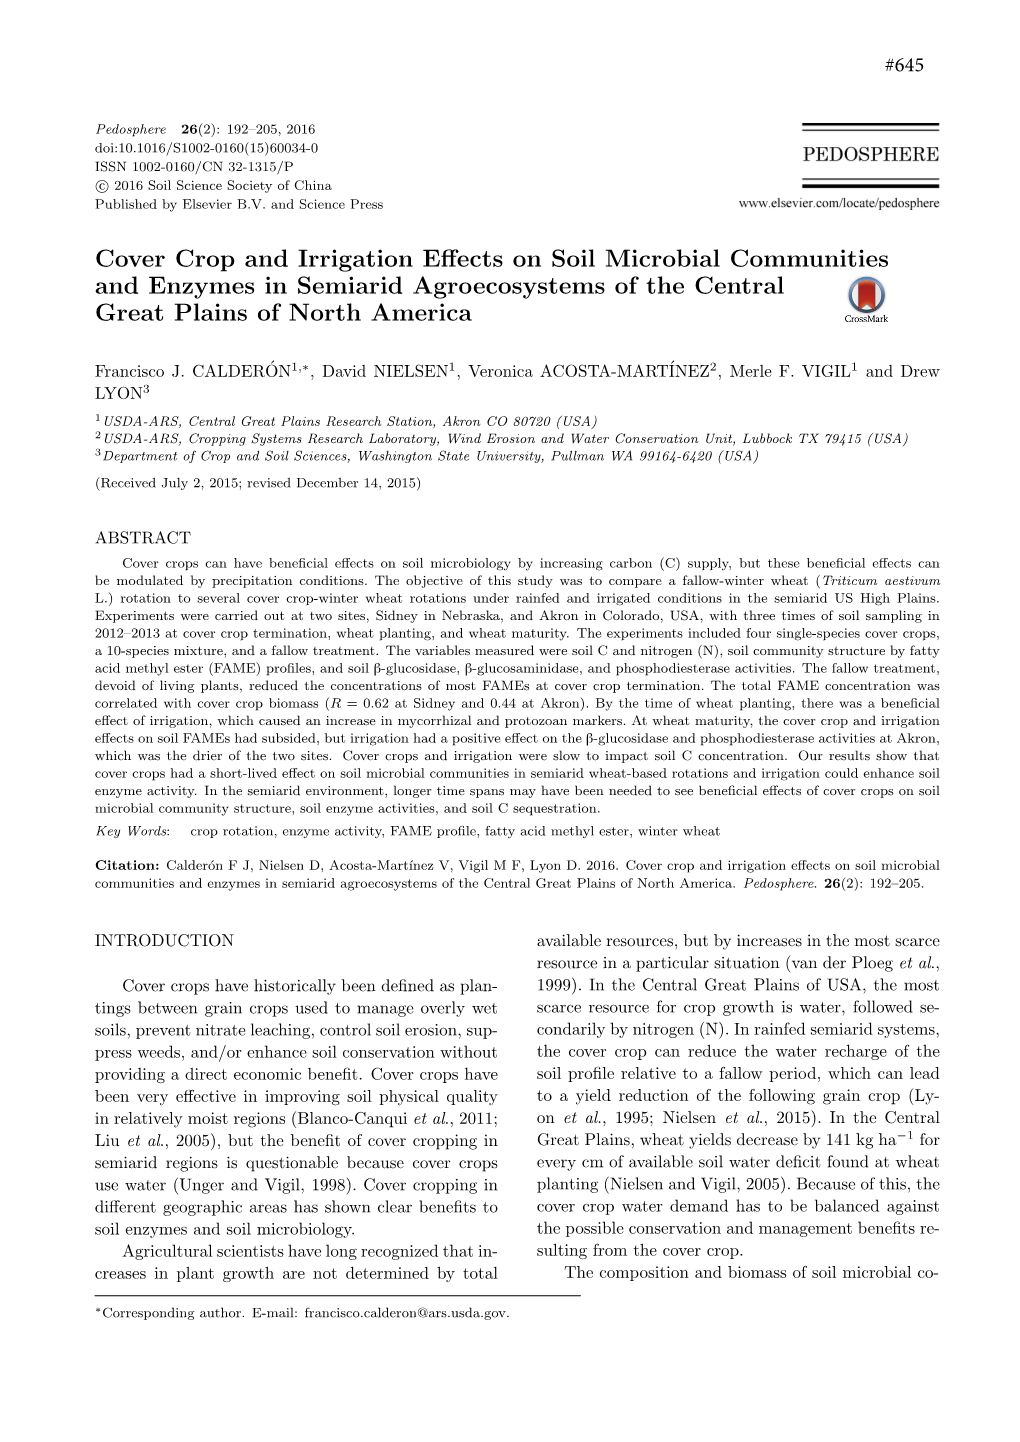 Cover Crop and Irrigation Effects on Soil Microbial Communities And